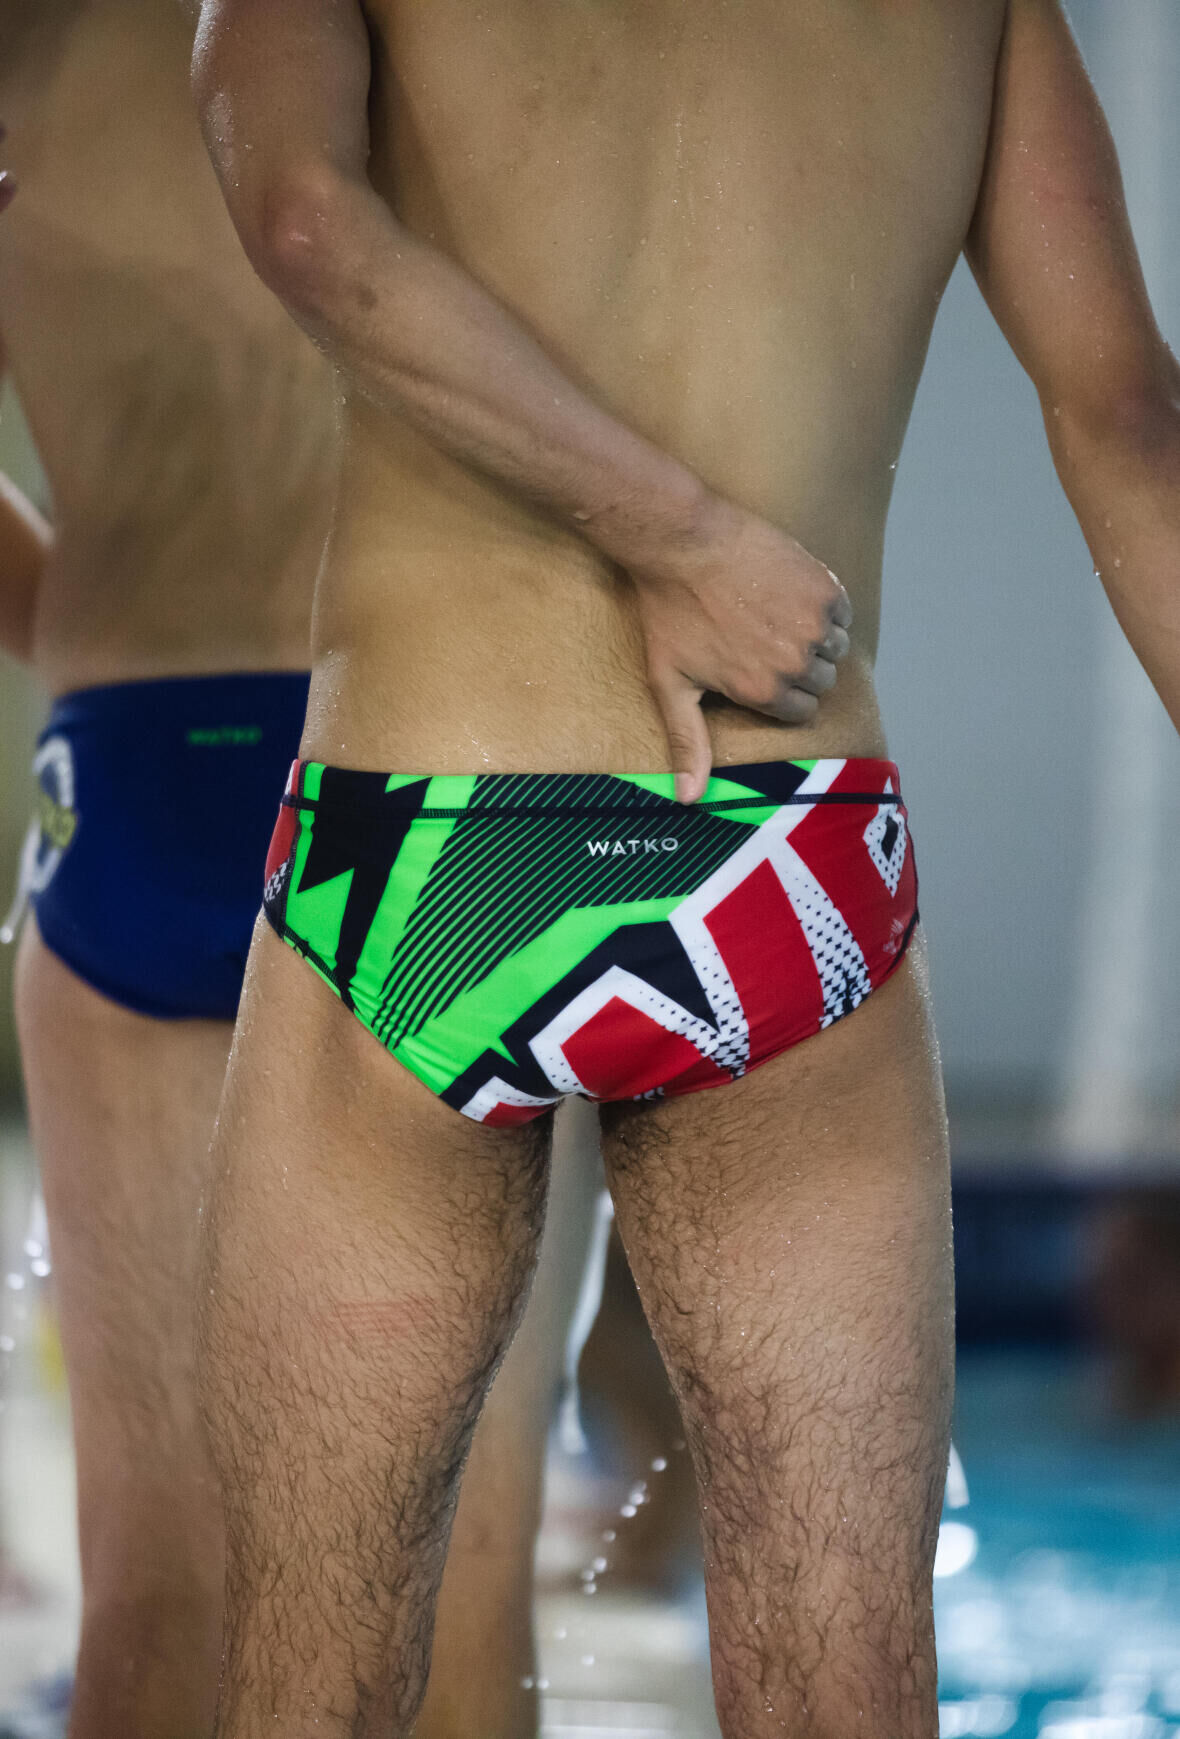 How to choose my waterpolo suit